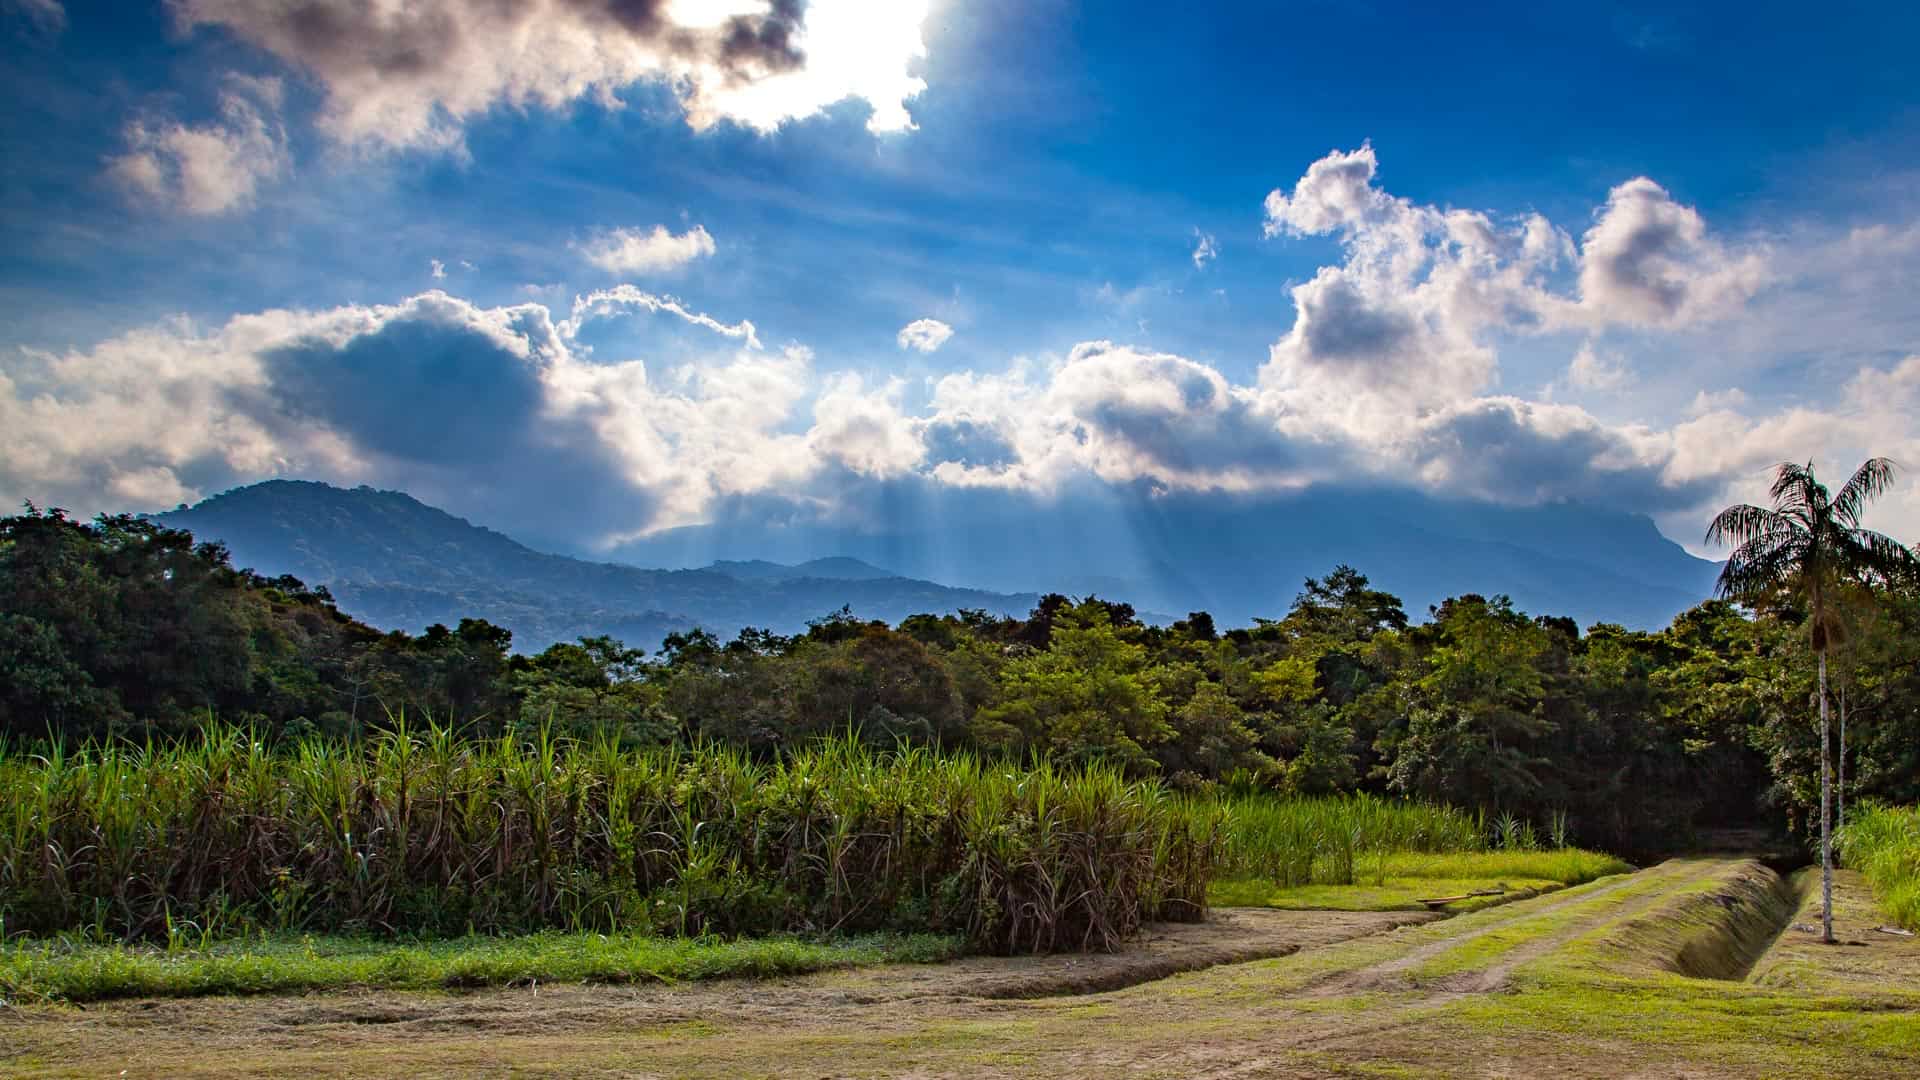 Serra do Mar forest and field with mountains in back